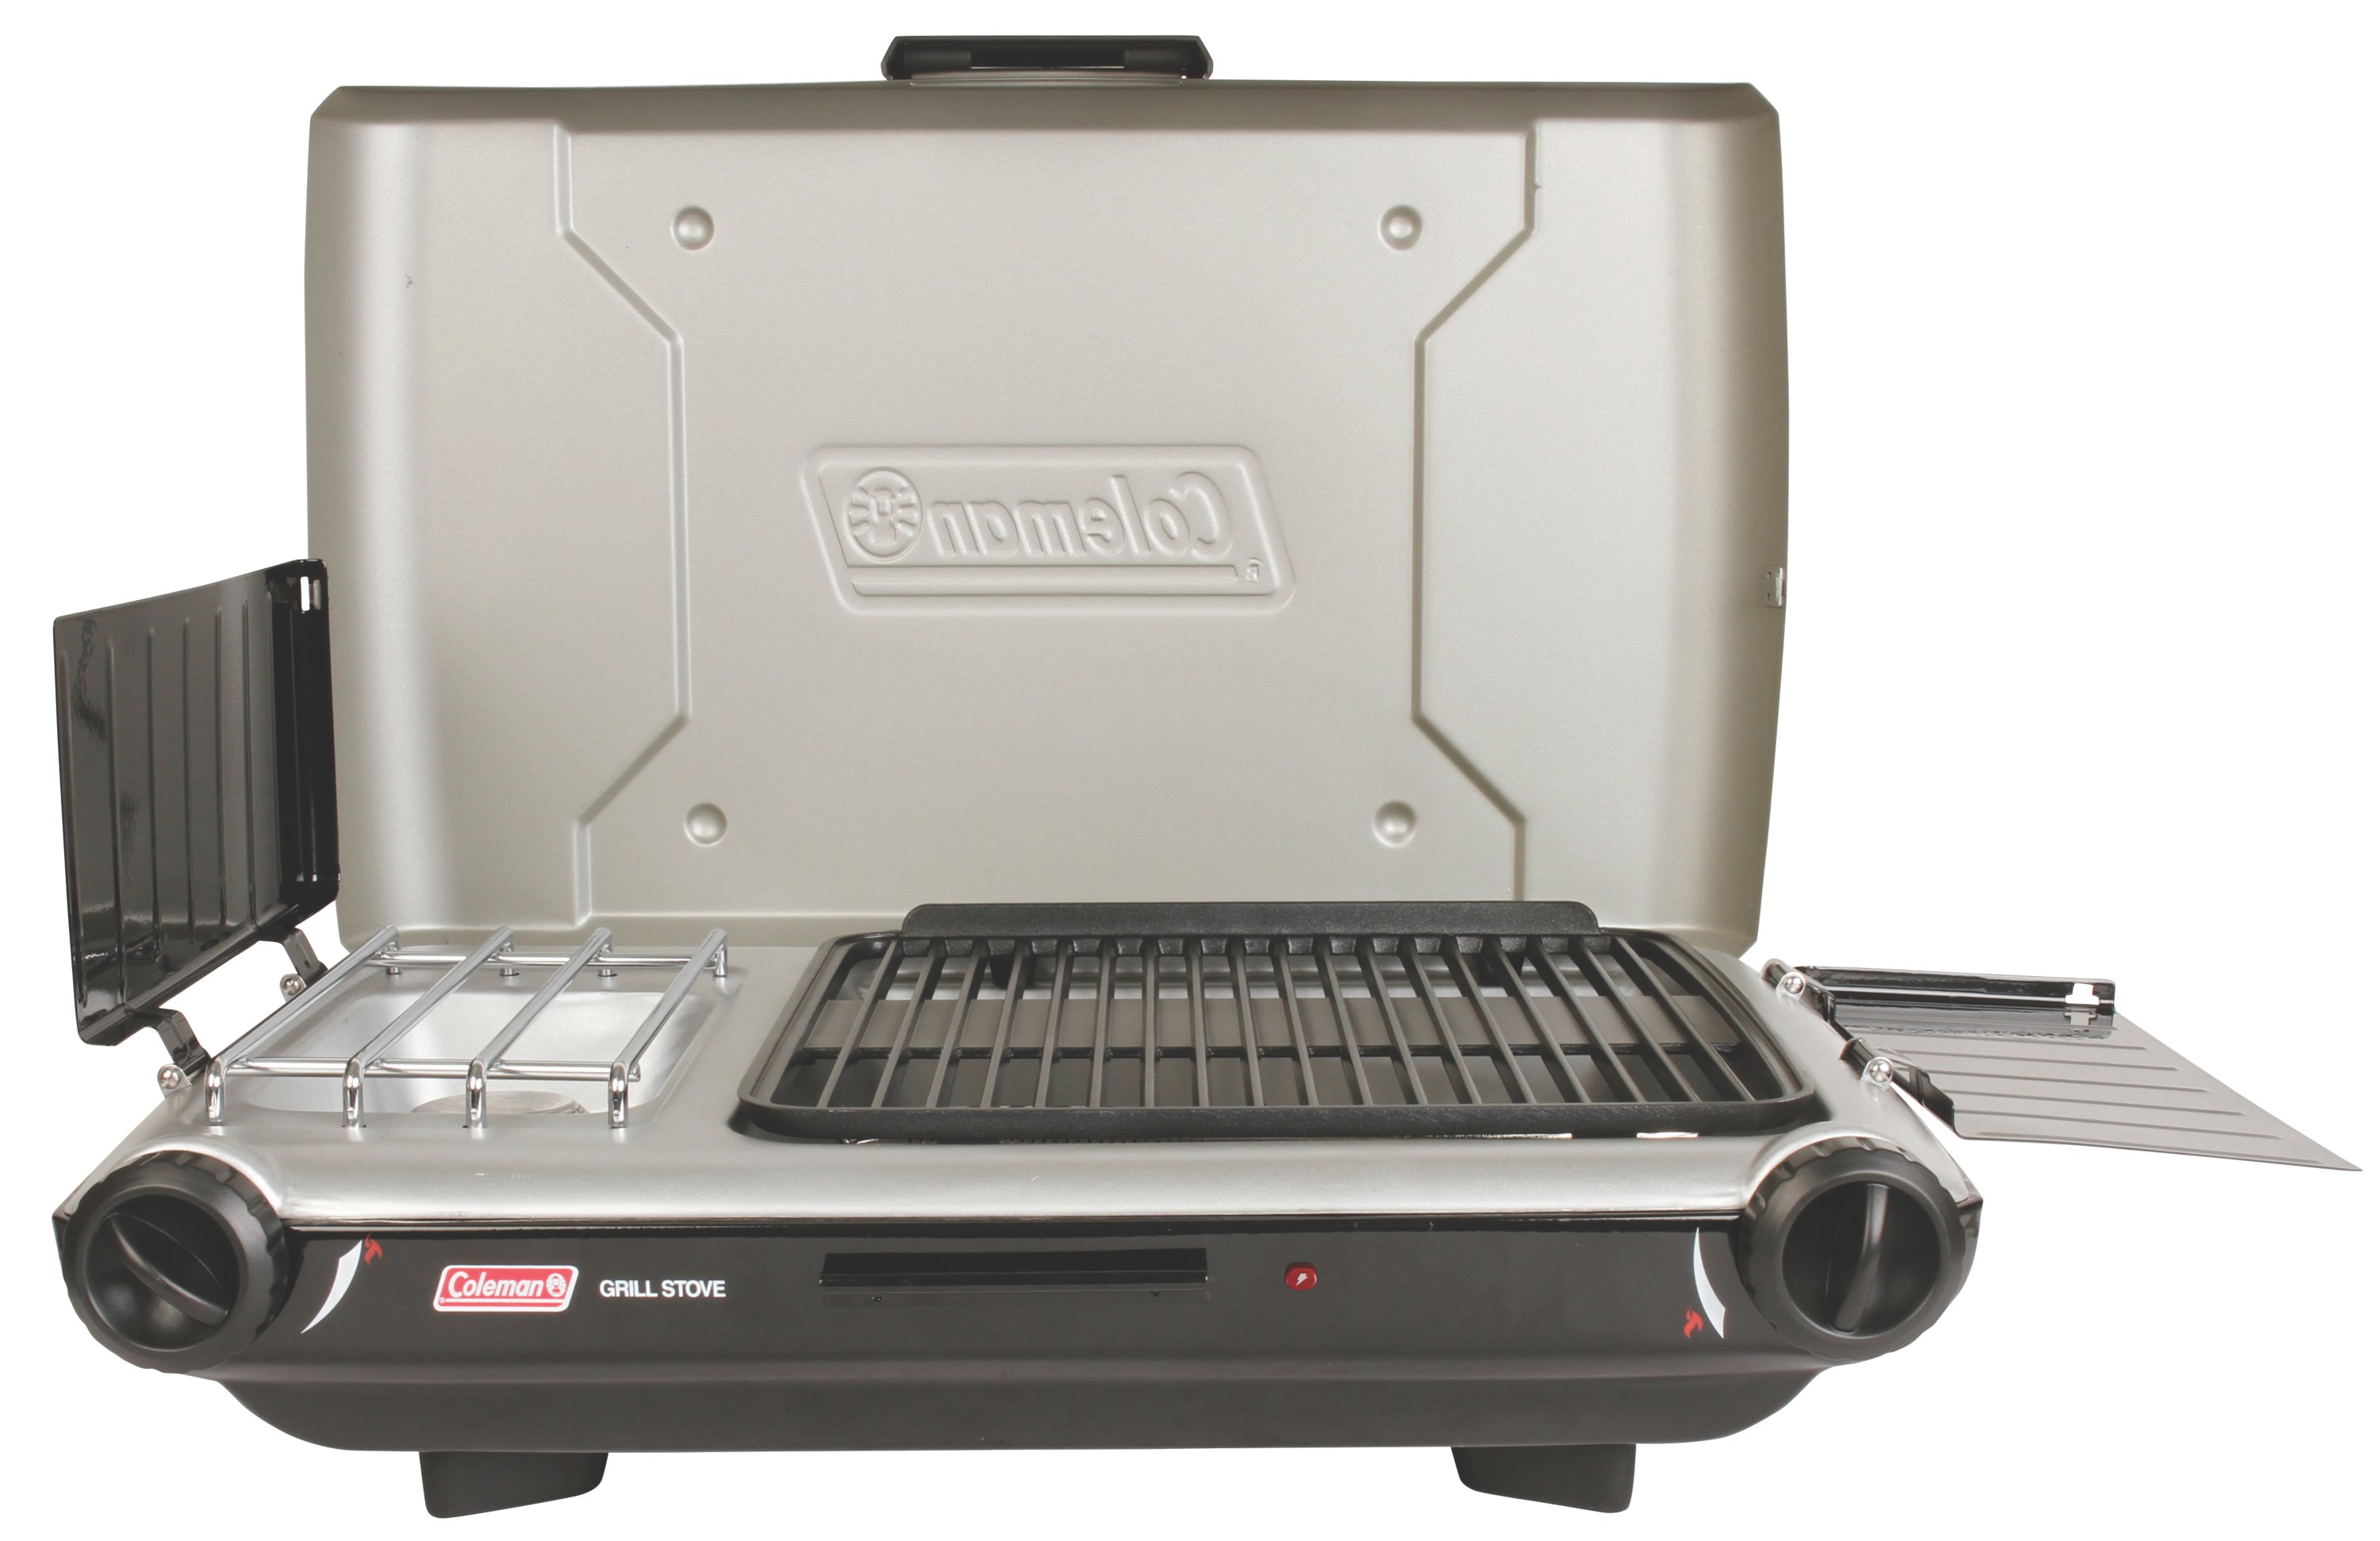 Tabletop Propane 2-in-1 Grill/Stove, Coleman